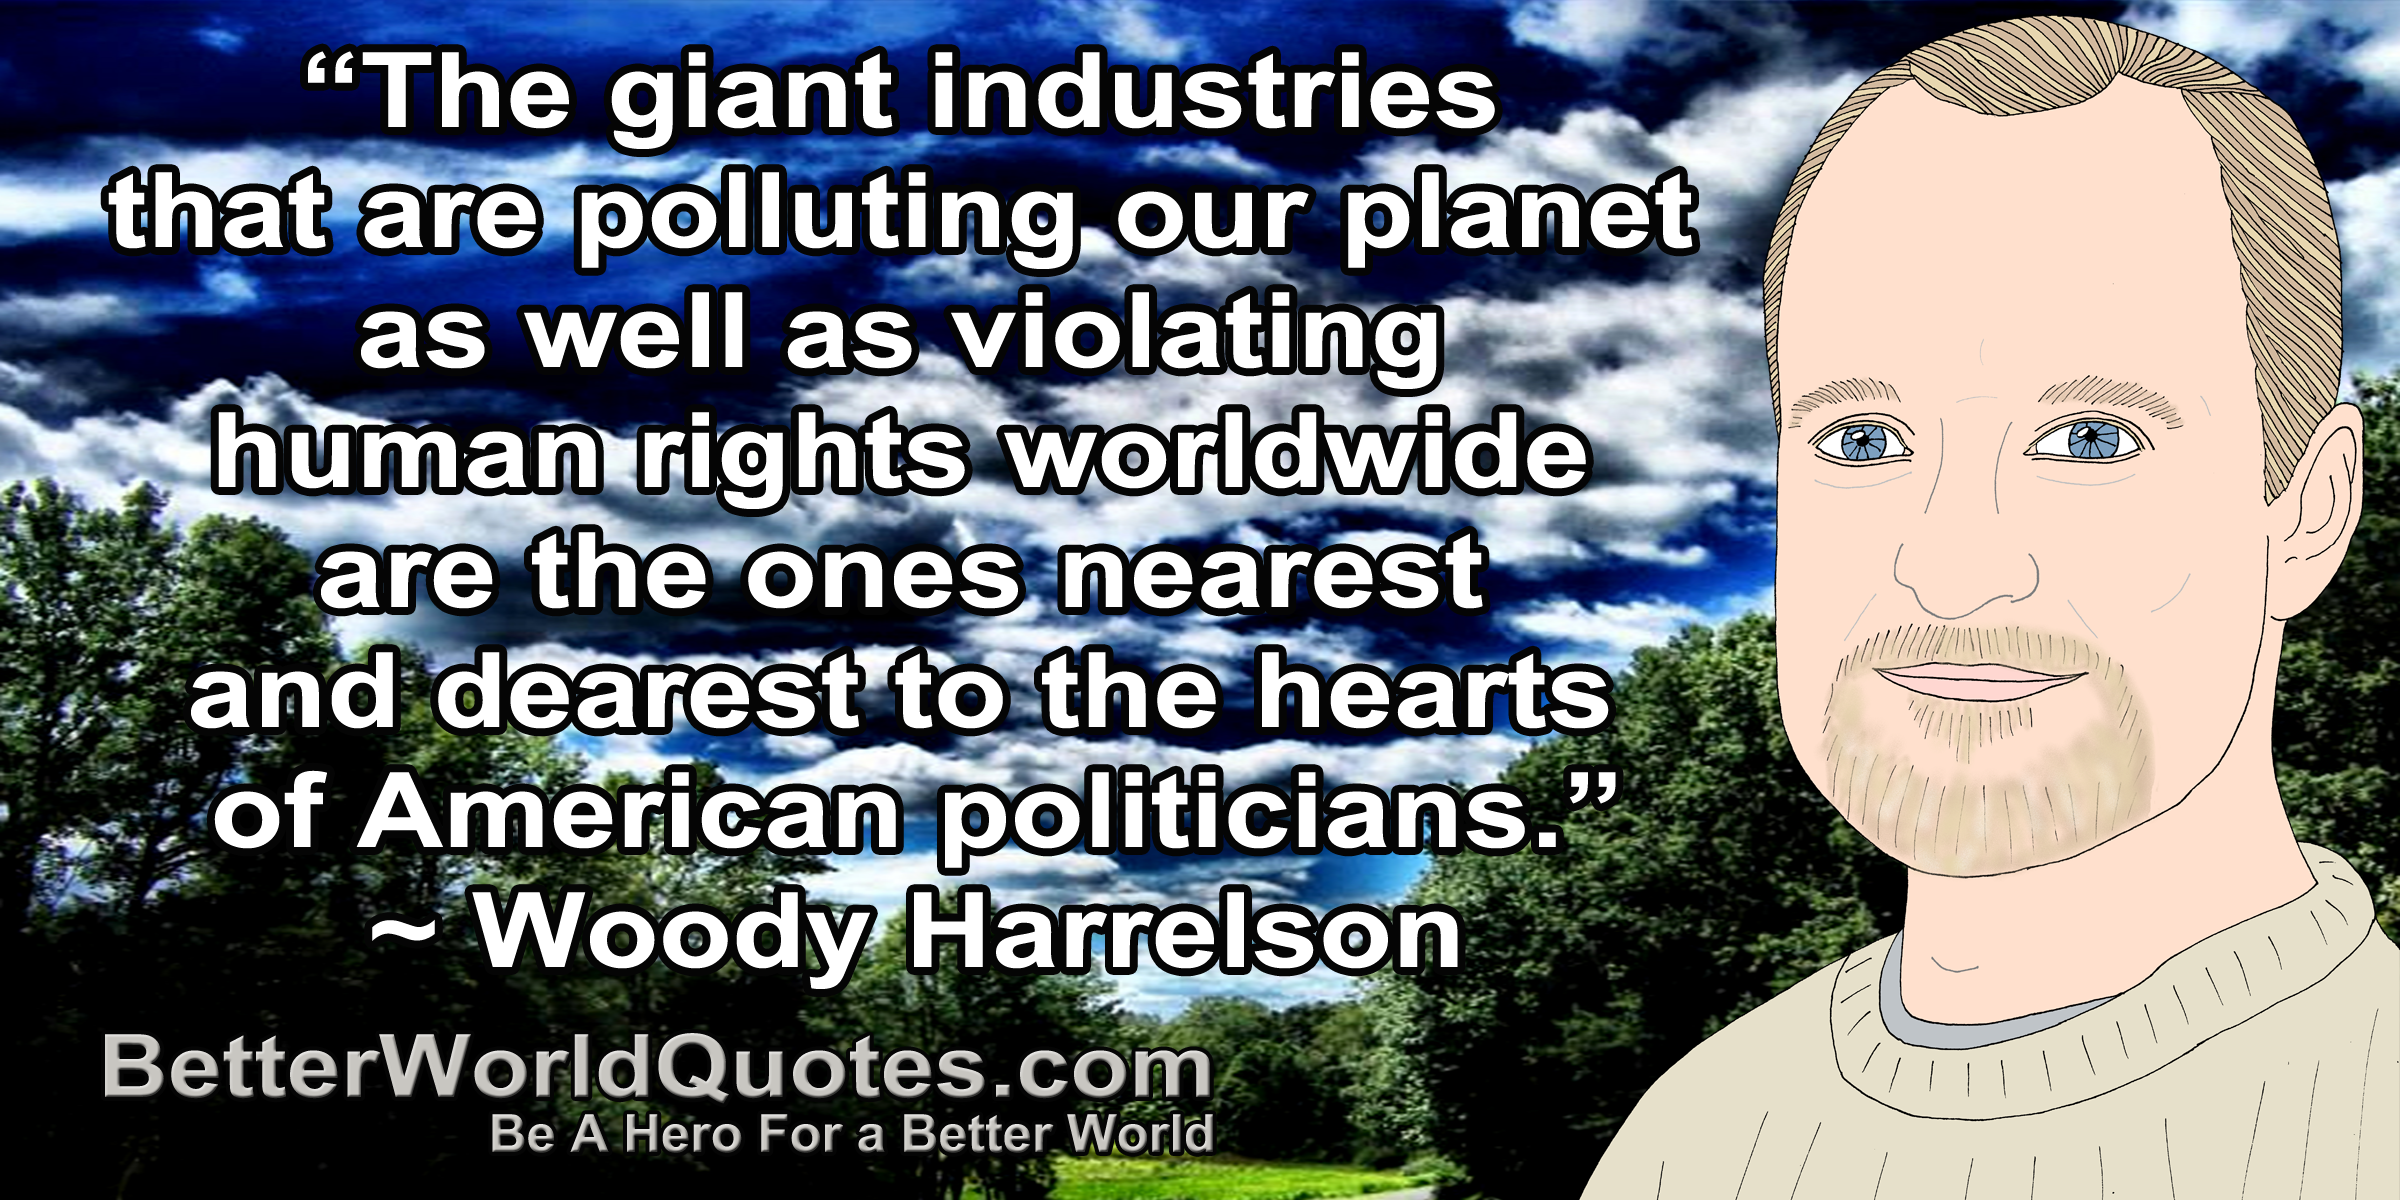 The giant industries that are polluting our planet as well as violating human rights worldwide are the ones nearest and dearest to the hearts of American politicians. Woody Harrelson